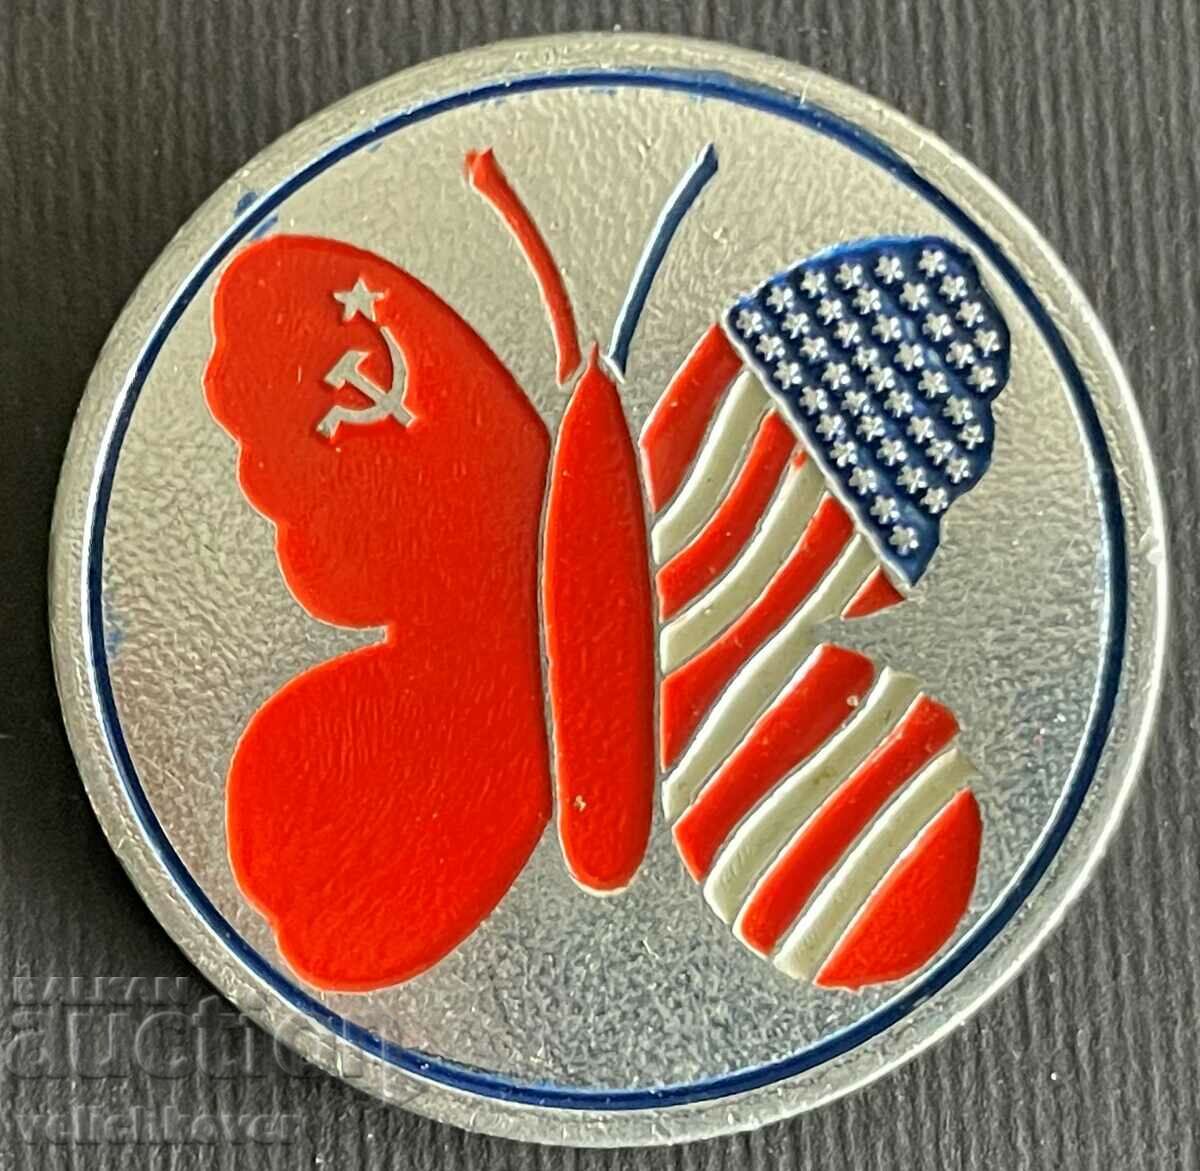 34670 USSR USA butterfly sign of friendship by idea Juna